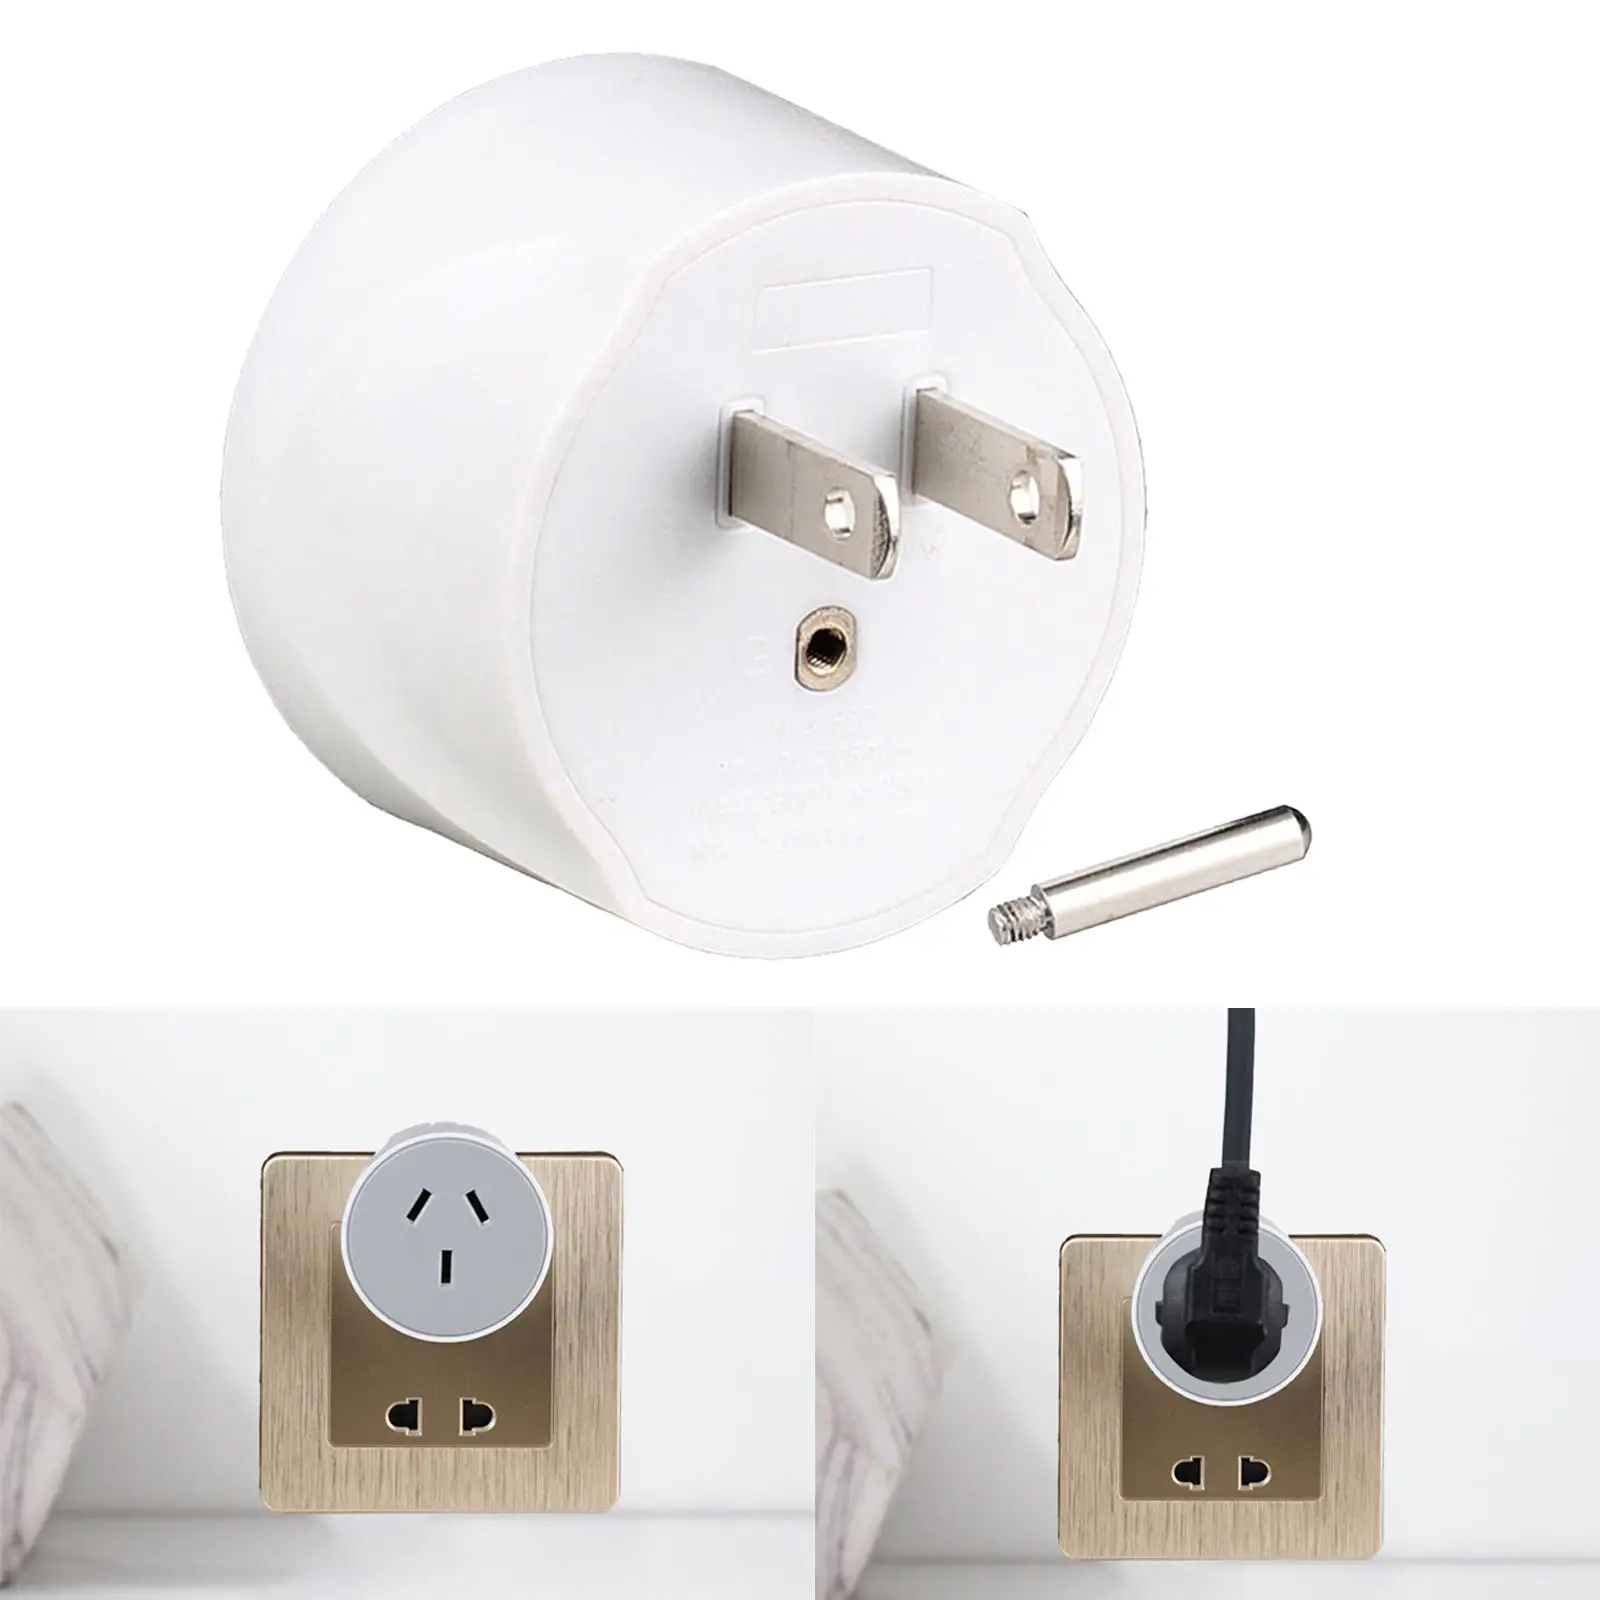 3 Prong to 2 Prong Adapter Charging Power Outlet for Travel